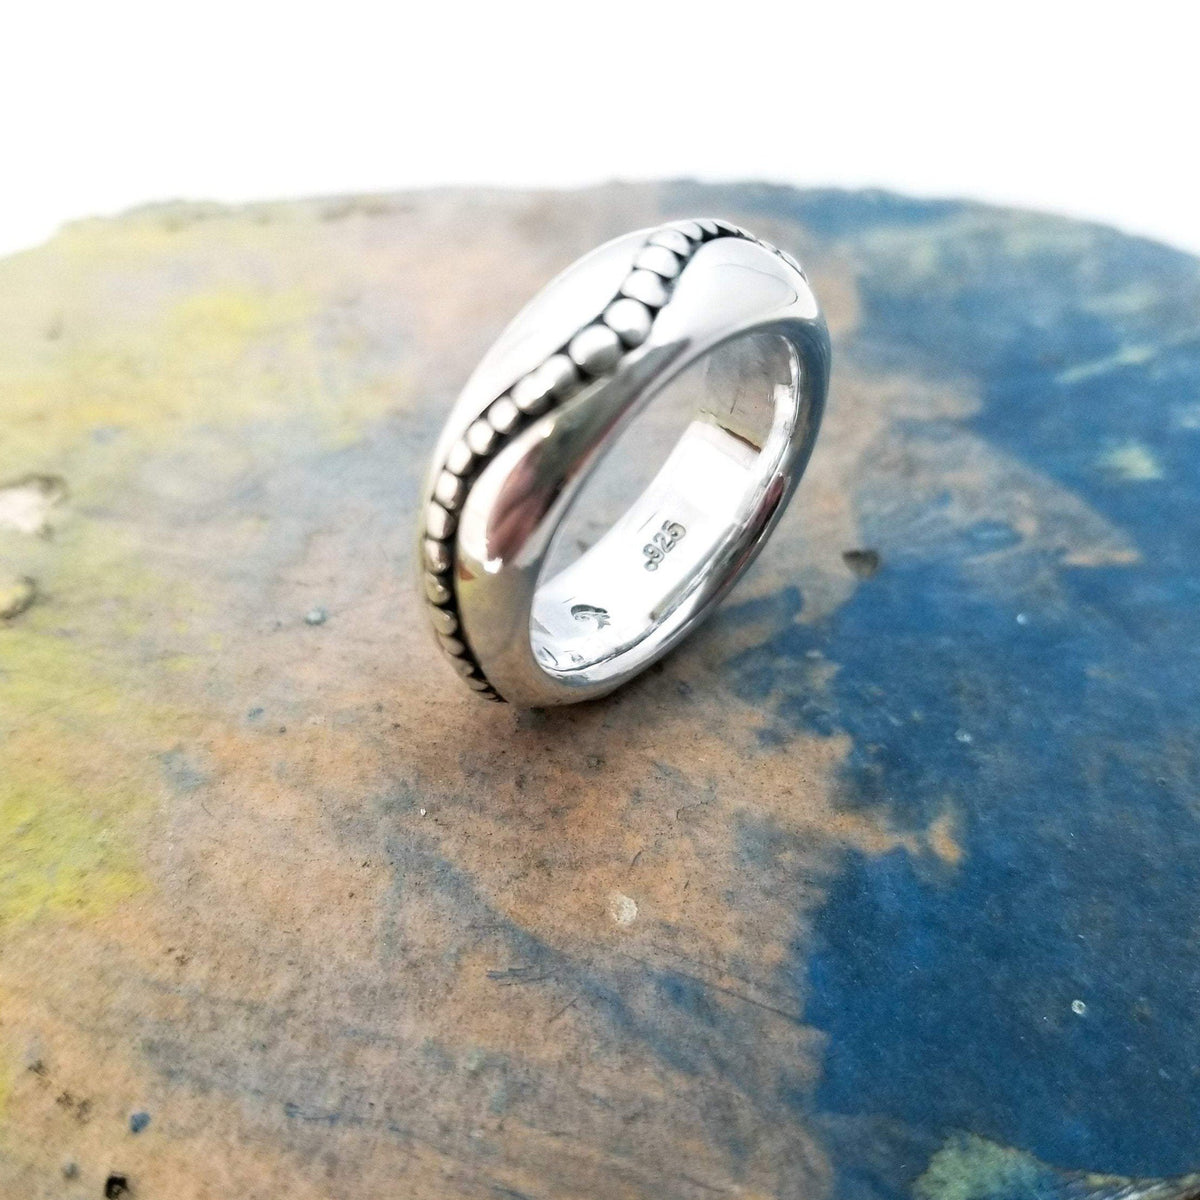 Pebble Ring is a solid Sterling silver.925 | one of kind 